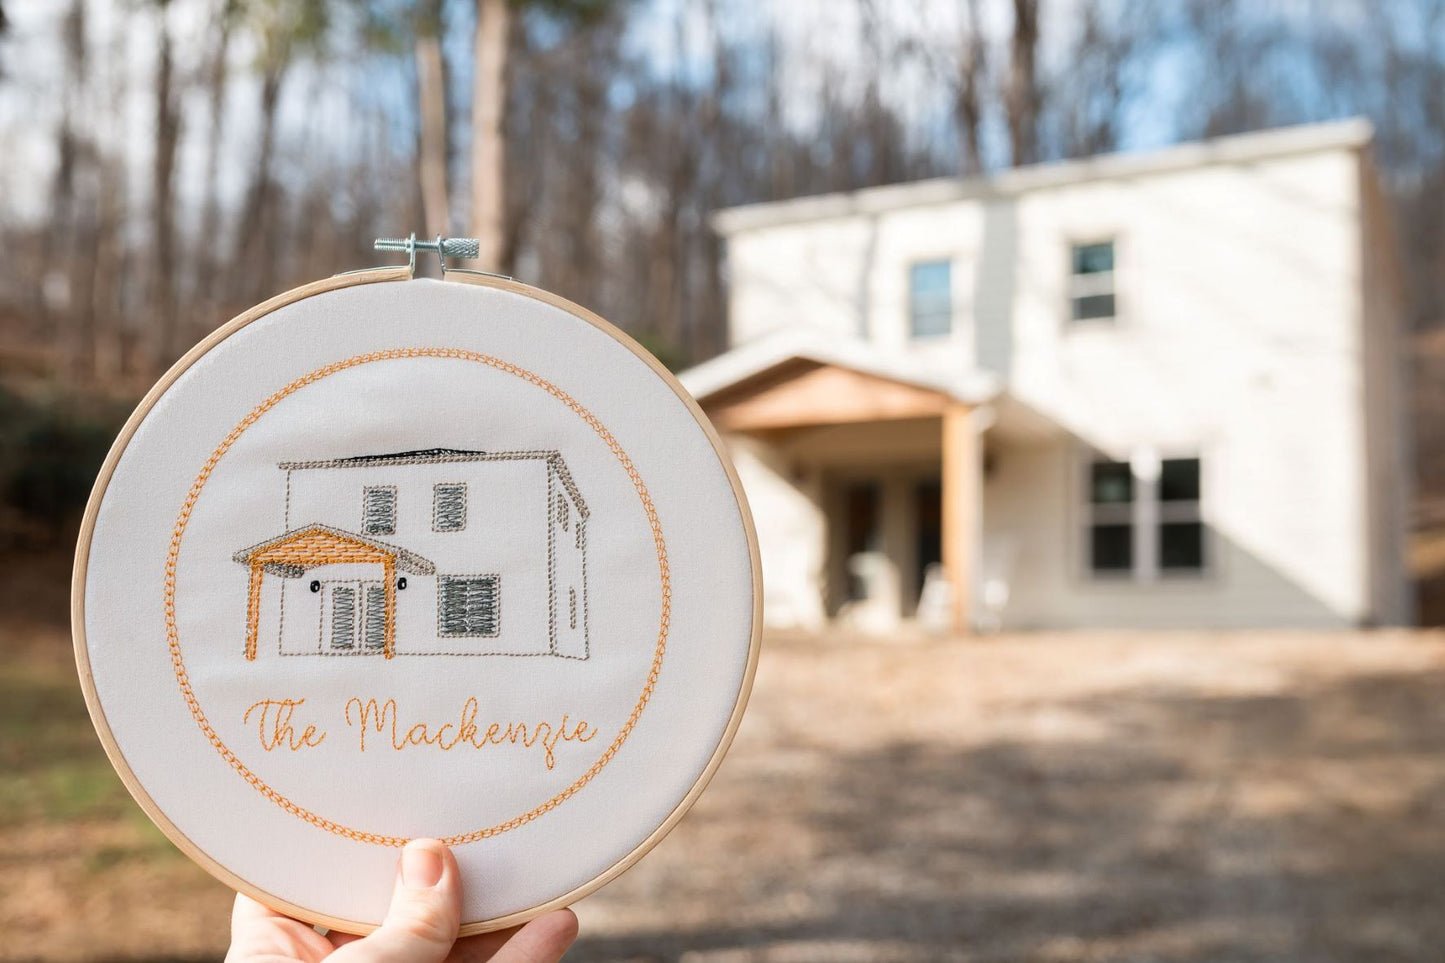 Custom embroidered home portrait in hoop